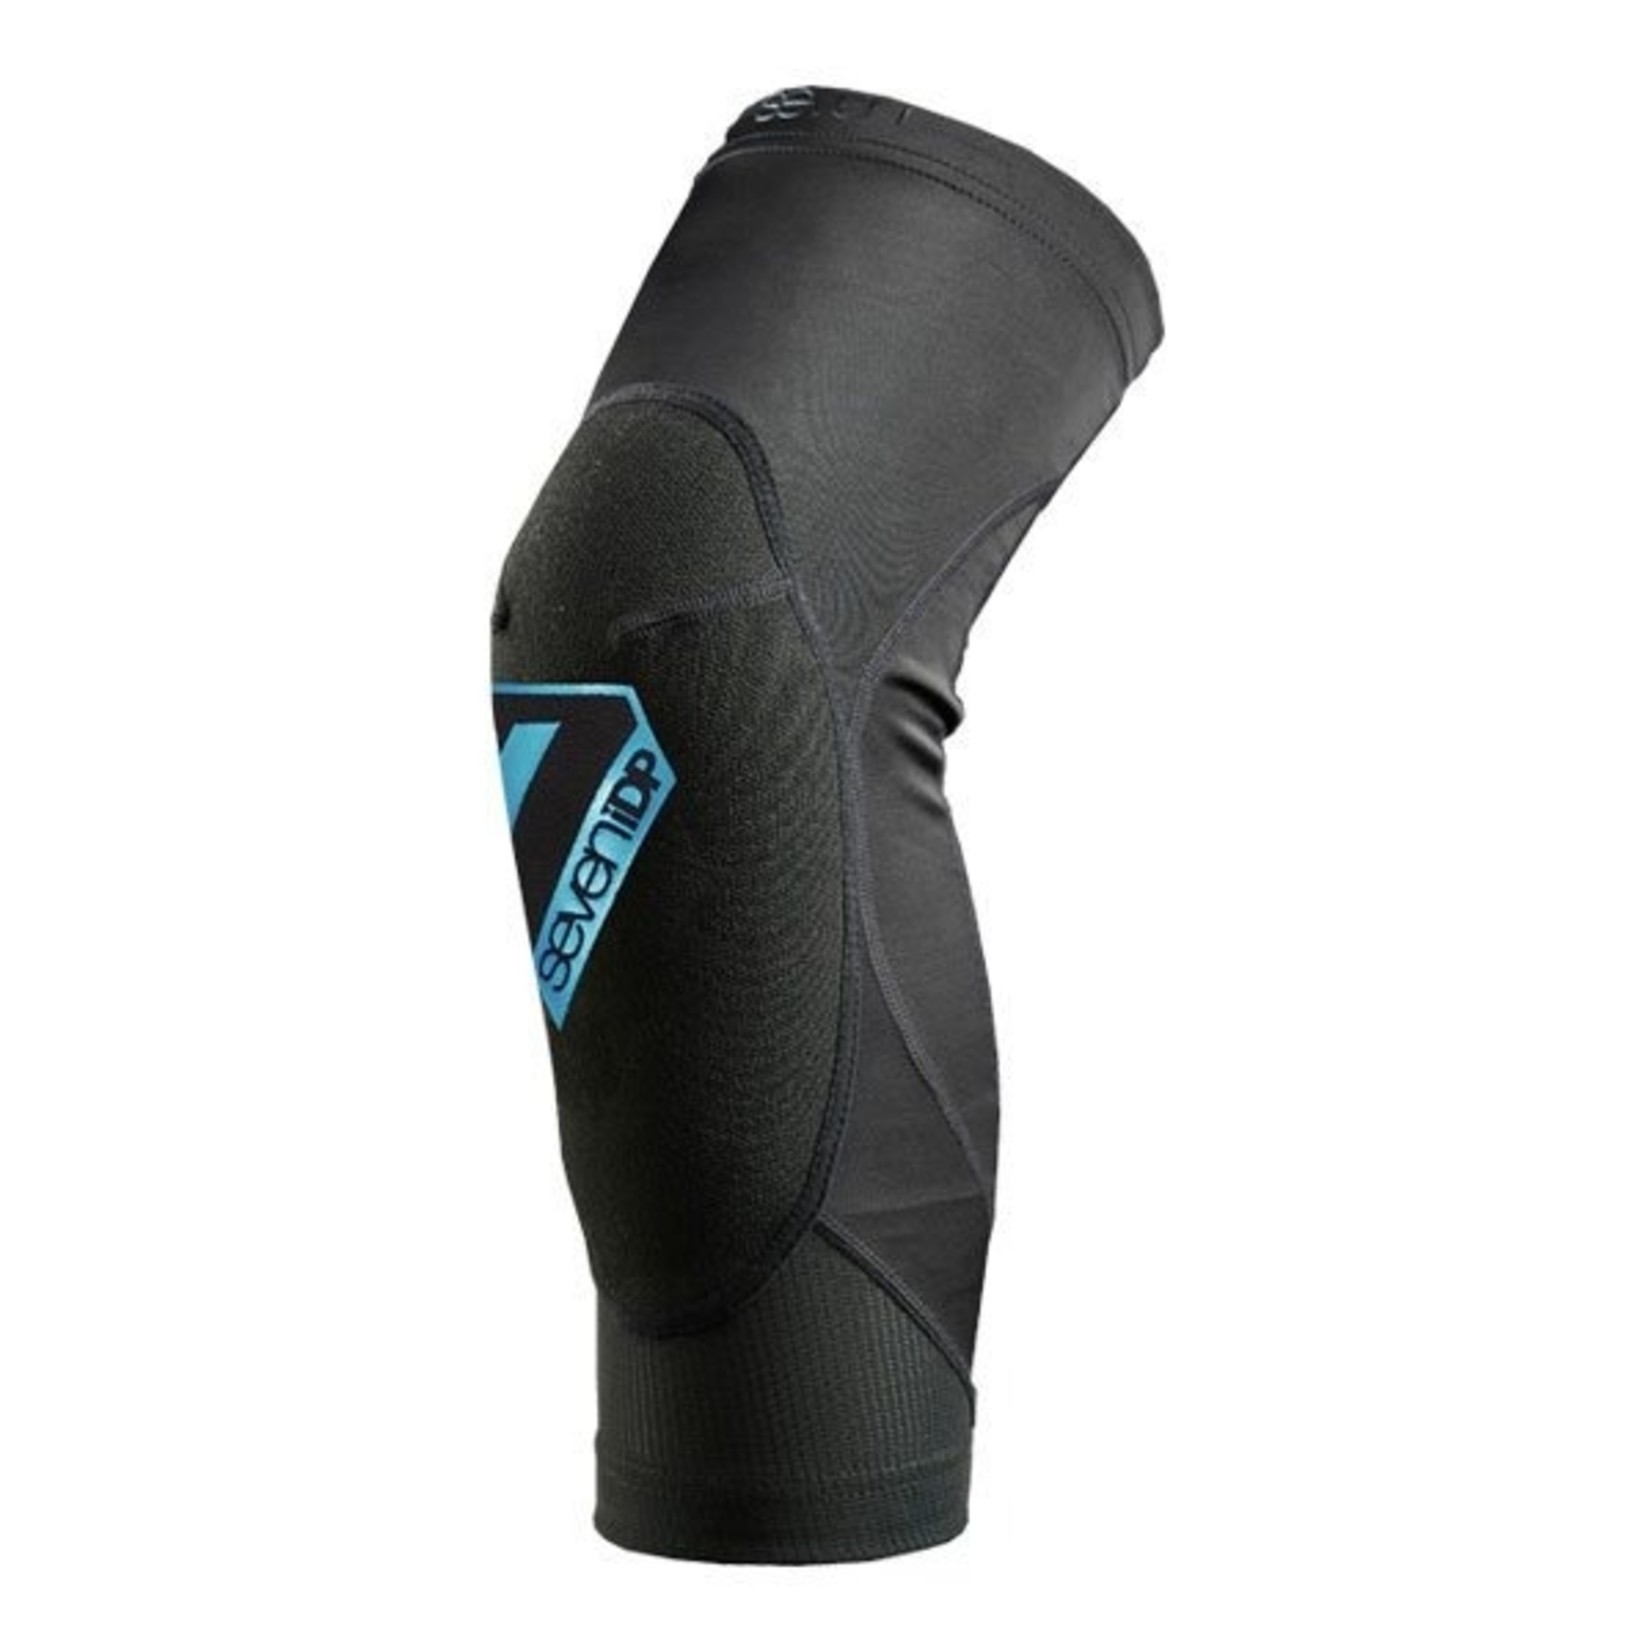 SEVEN IDP SEVEN IDP YOUTH TRANSITION KNEE PADS